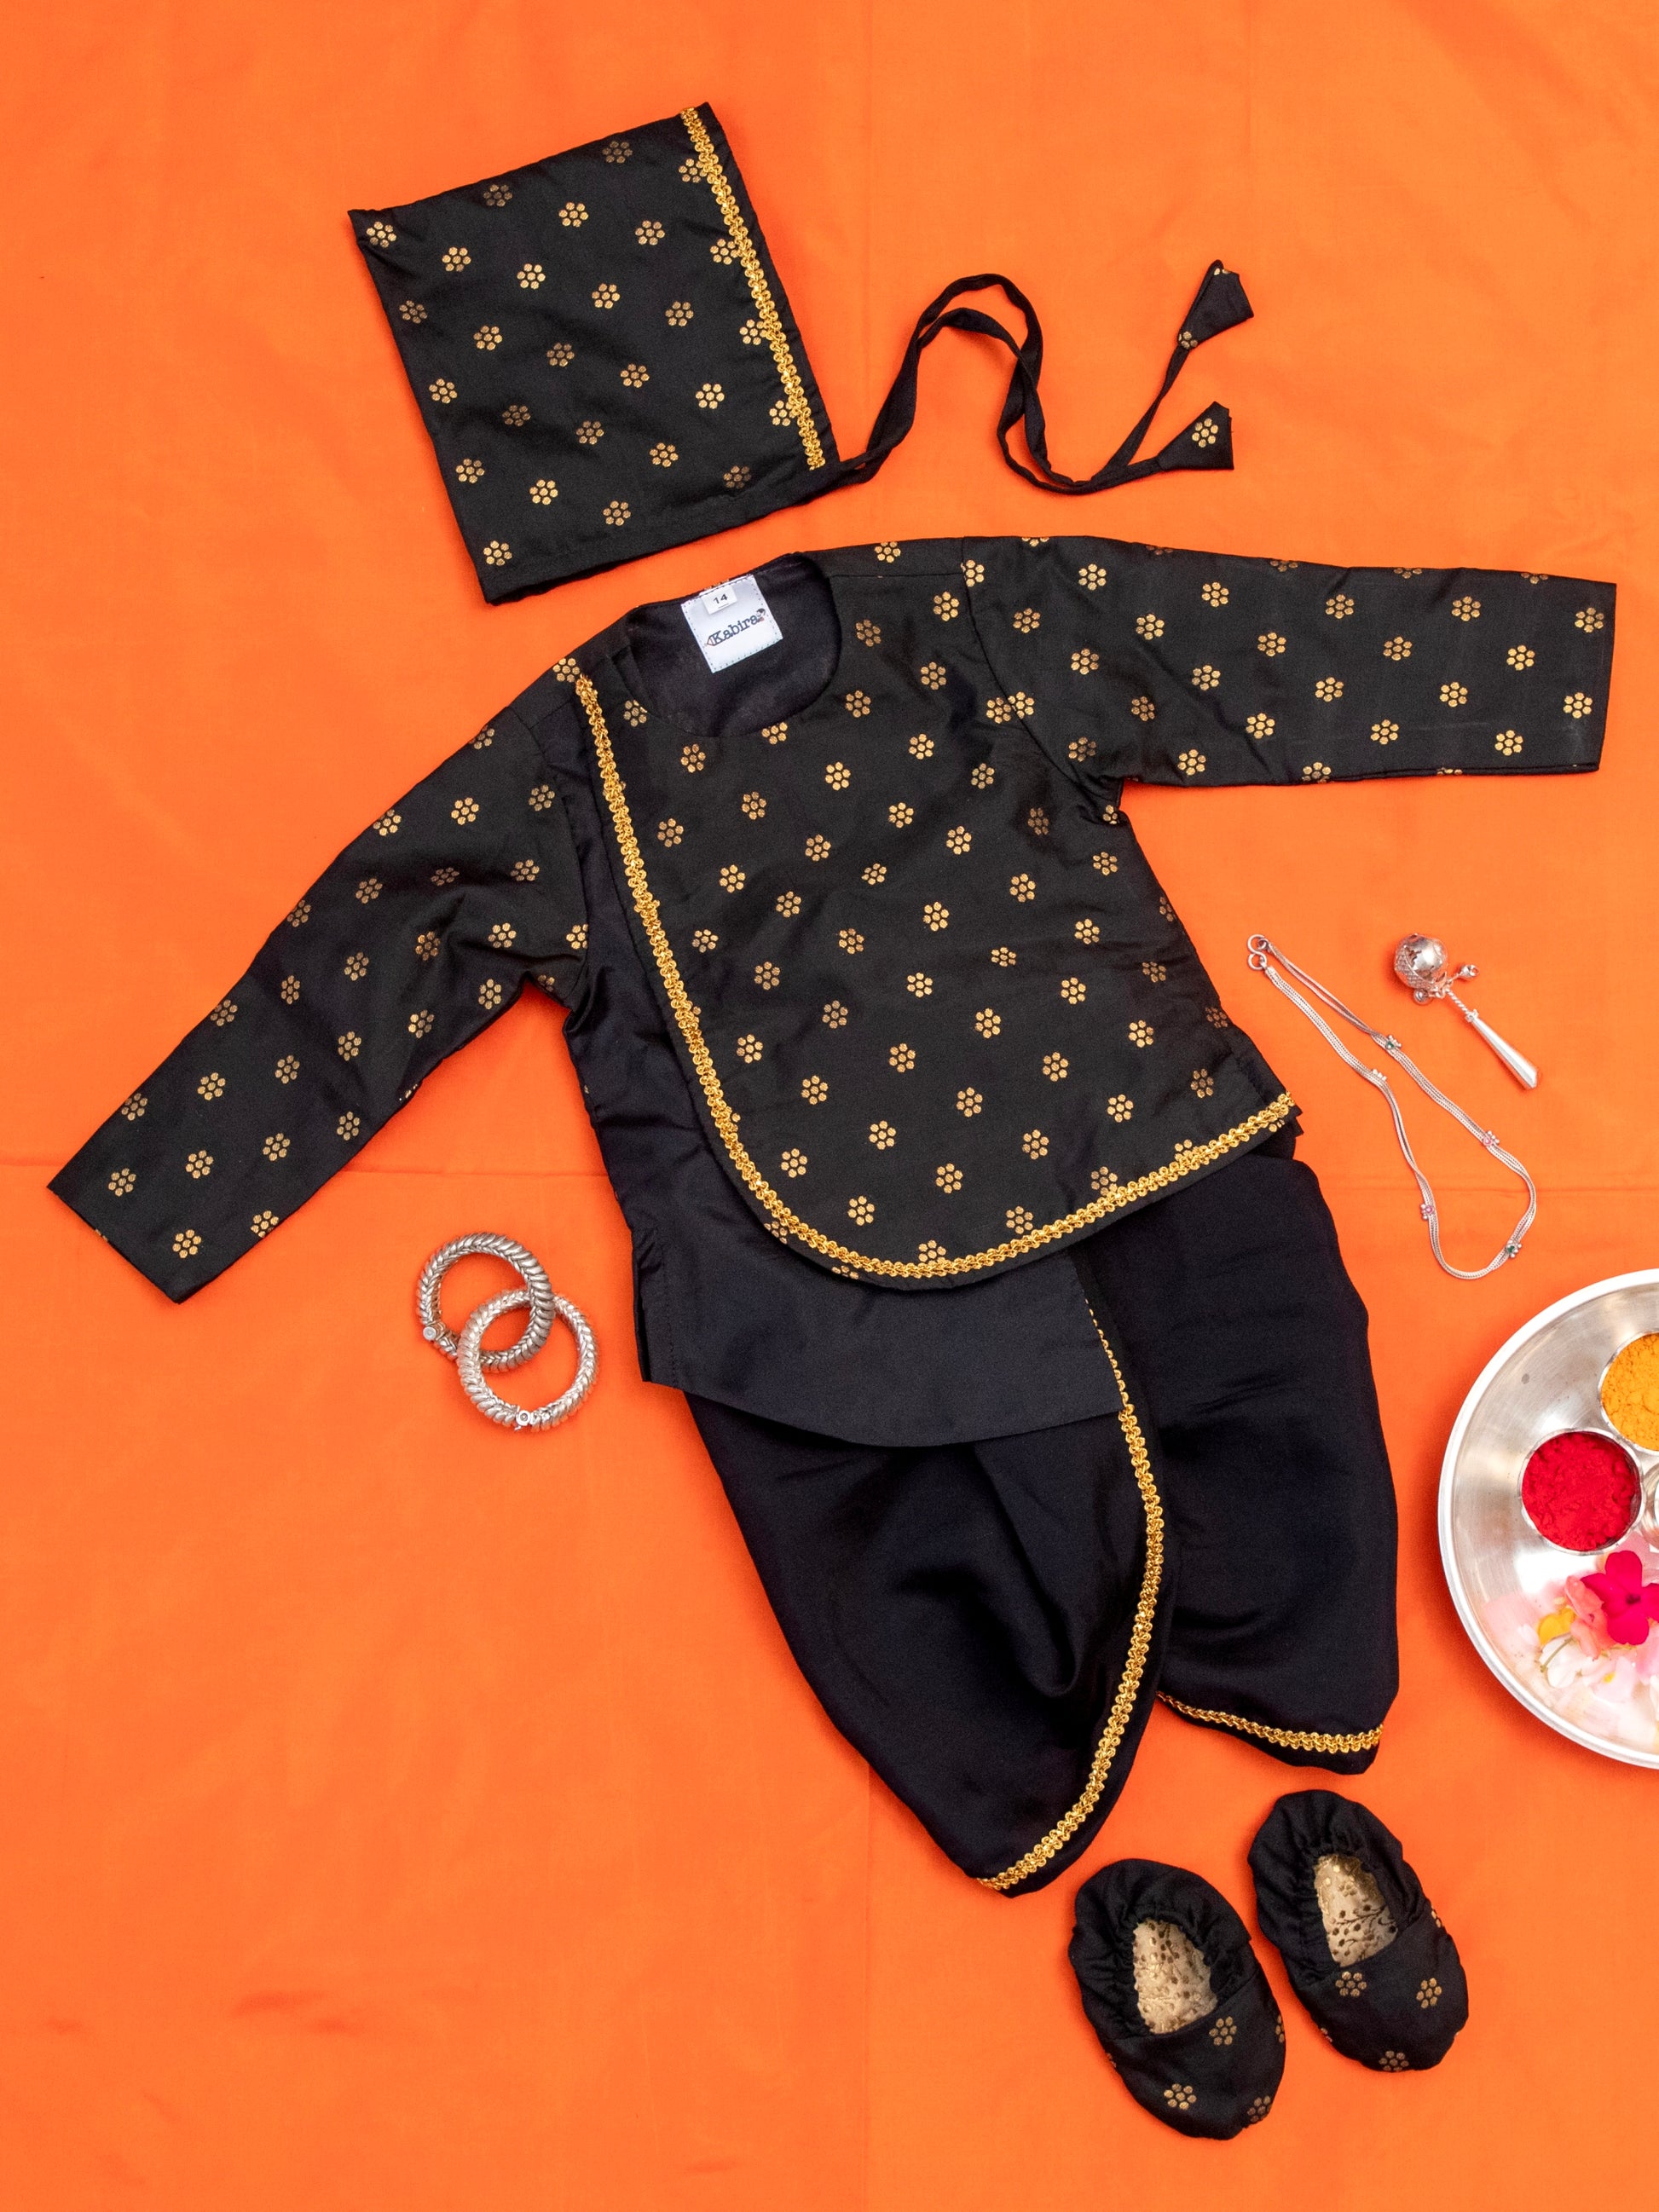 Black Brocade Dhoti Kurta Set for a newborn baby boy,includes black cotton silk dhoti,matching bonnet & booties.It's the perfect outfit for your baby's naming ceremony,naamkaran,annaprashan ceremony.Traditional dress for Noolukettu Ceremony,Pachavi Puja,cradle ceremony,Rice Ceremony,Chatti Puja etc. Apt gifting idea